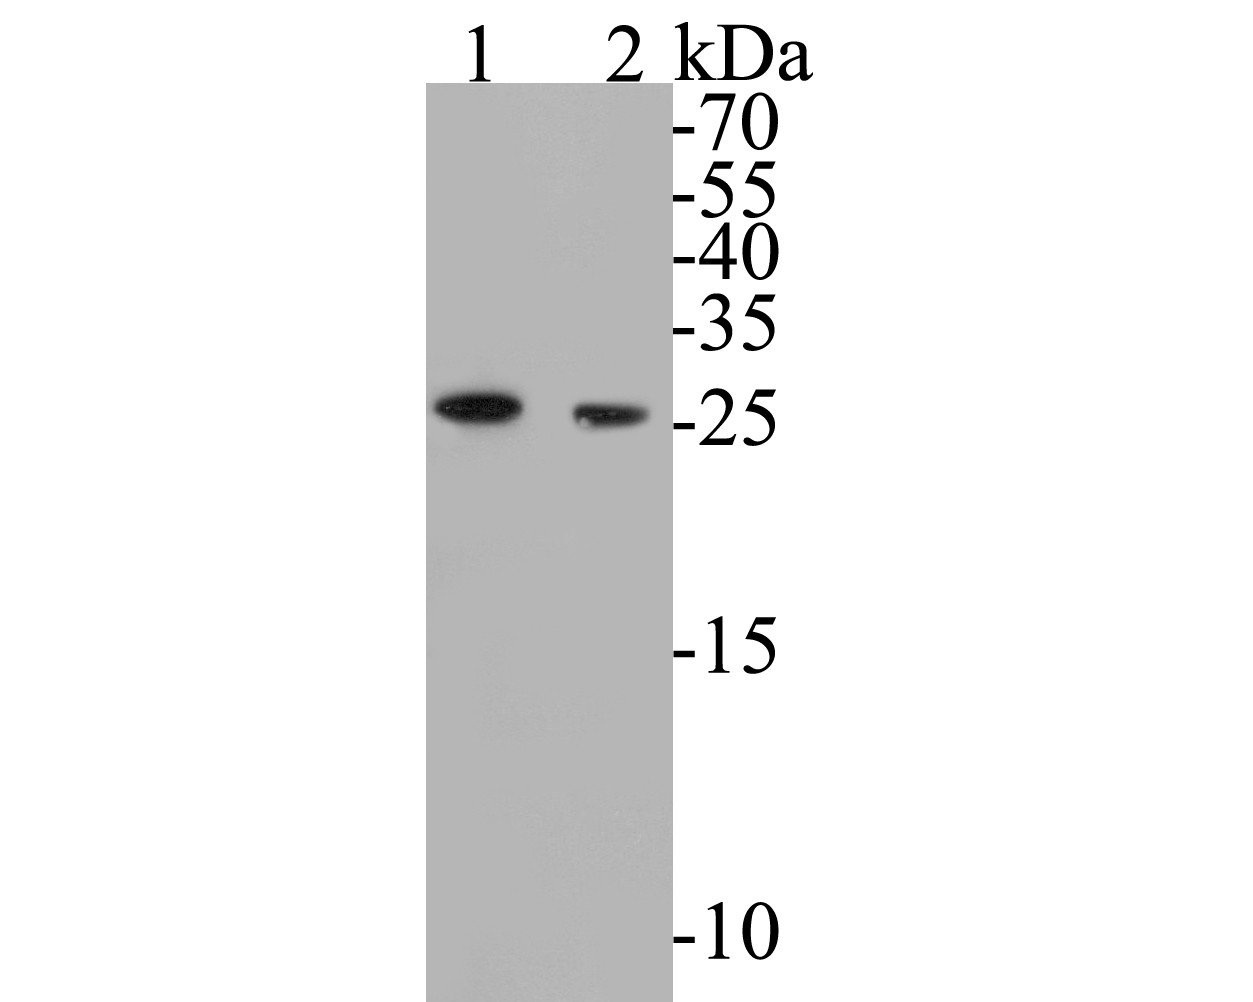 Western blot analysis of BCL2L12 on different lysates. Proteins were transferred to a PVDF membrane and blocked with 5% BSA in PBS for 1 hour at room temperature. The primary antibody (ET7110-02, 1/500) was used in 5% BSA at room temperature for 2 hours. Goat Anti-Rabbit IgG - HRP Secondary Antibody (HA1001) at 1:5,000 dilution was used for 1 hour at room temperature.<br />
Positive control: <br />
Lane 1: MCF-7 cell lysates<br />
Lane 2: PC-3M cell lysates